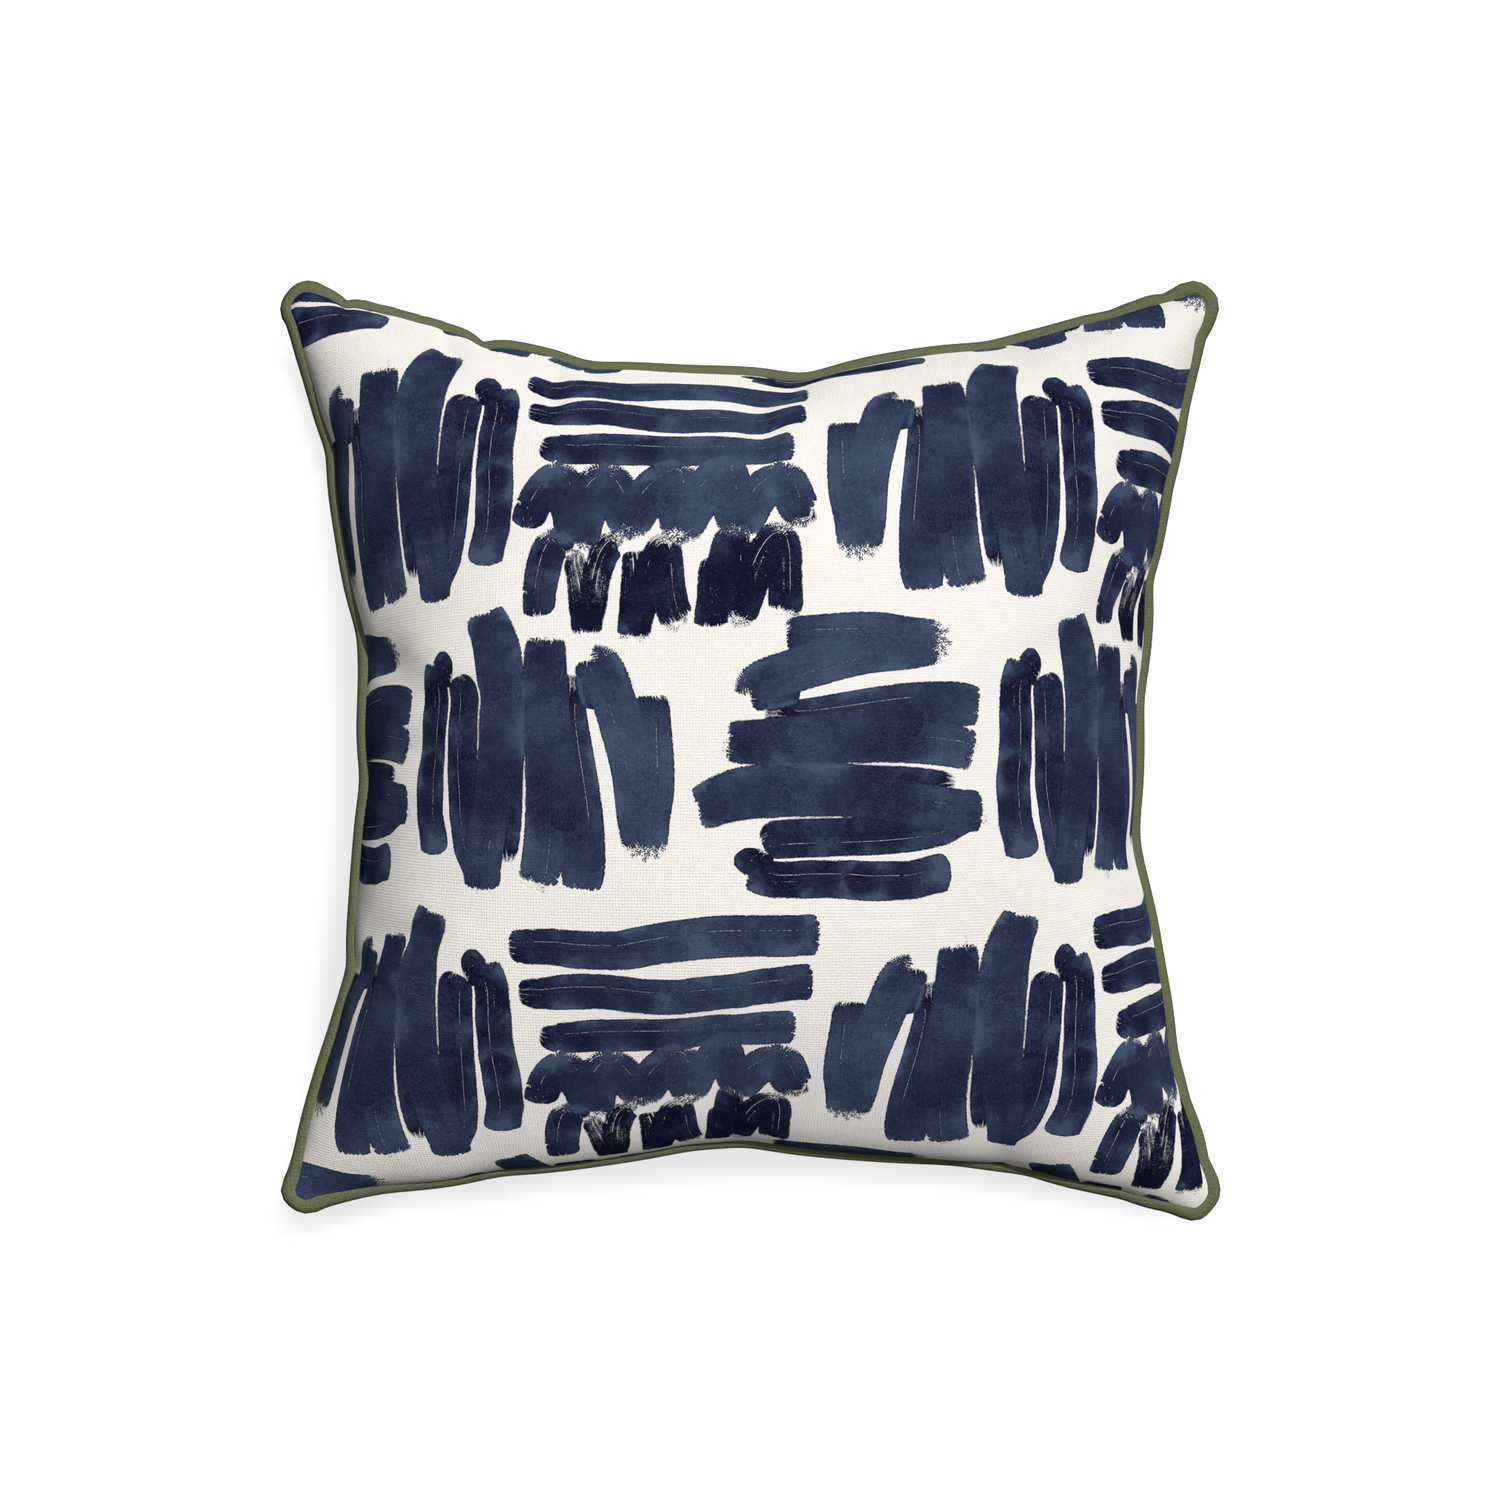 20-square warby custom pillow with f piping on white background